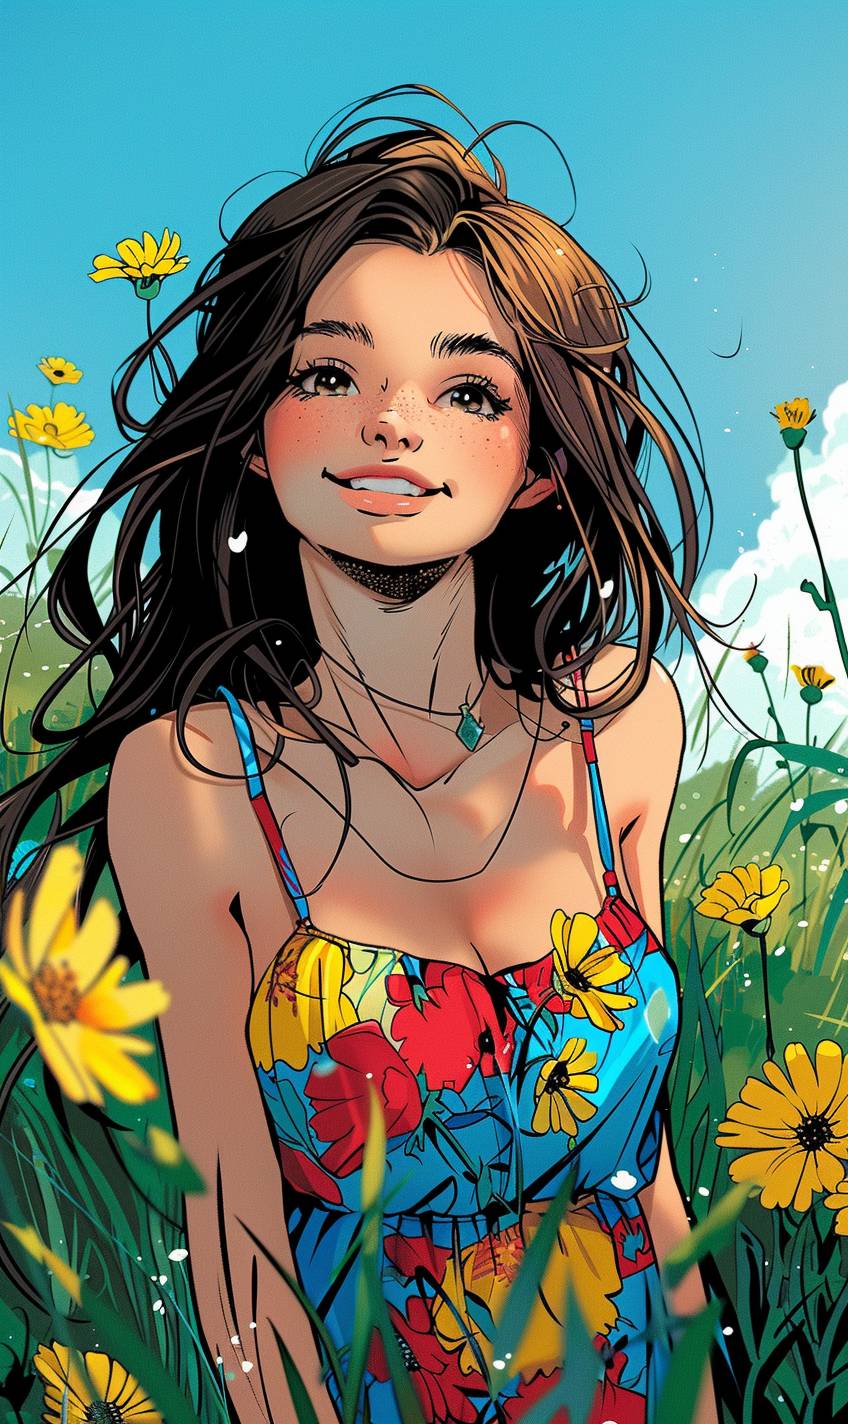 A girl with long brown hair and a bright smile, wearing a colorful dress, stands in a lush green meadow with wildflowers blooming around her. The sun is setting, casting a warm glow over the scene. The style is whimsical and vibrant, with lively colors and playful details. The overall mood is joyful and carefree, capturing the innocence and beauty of youth.